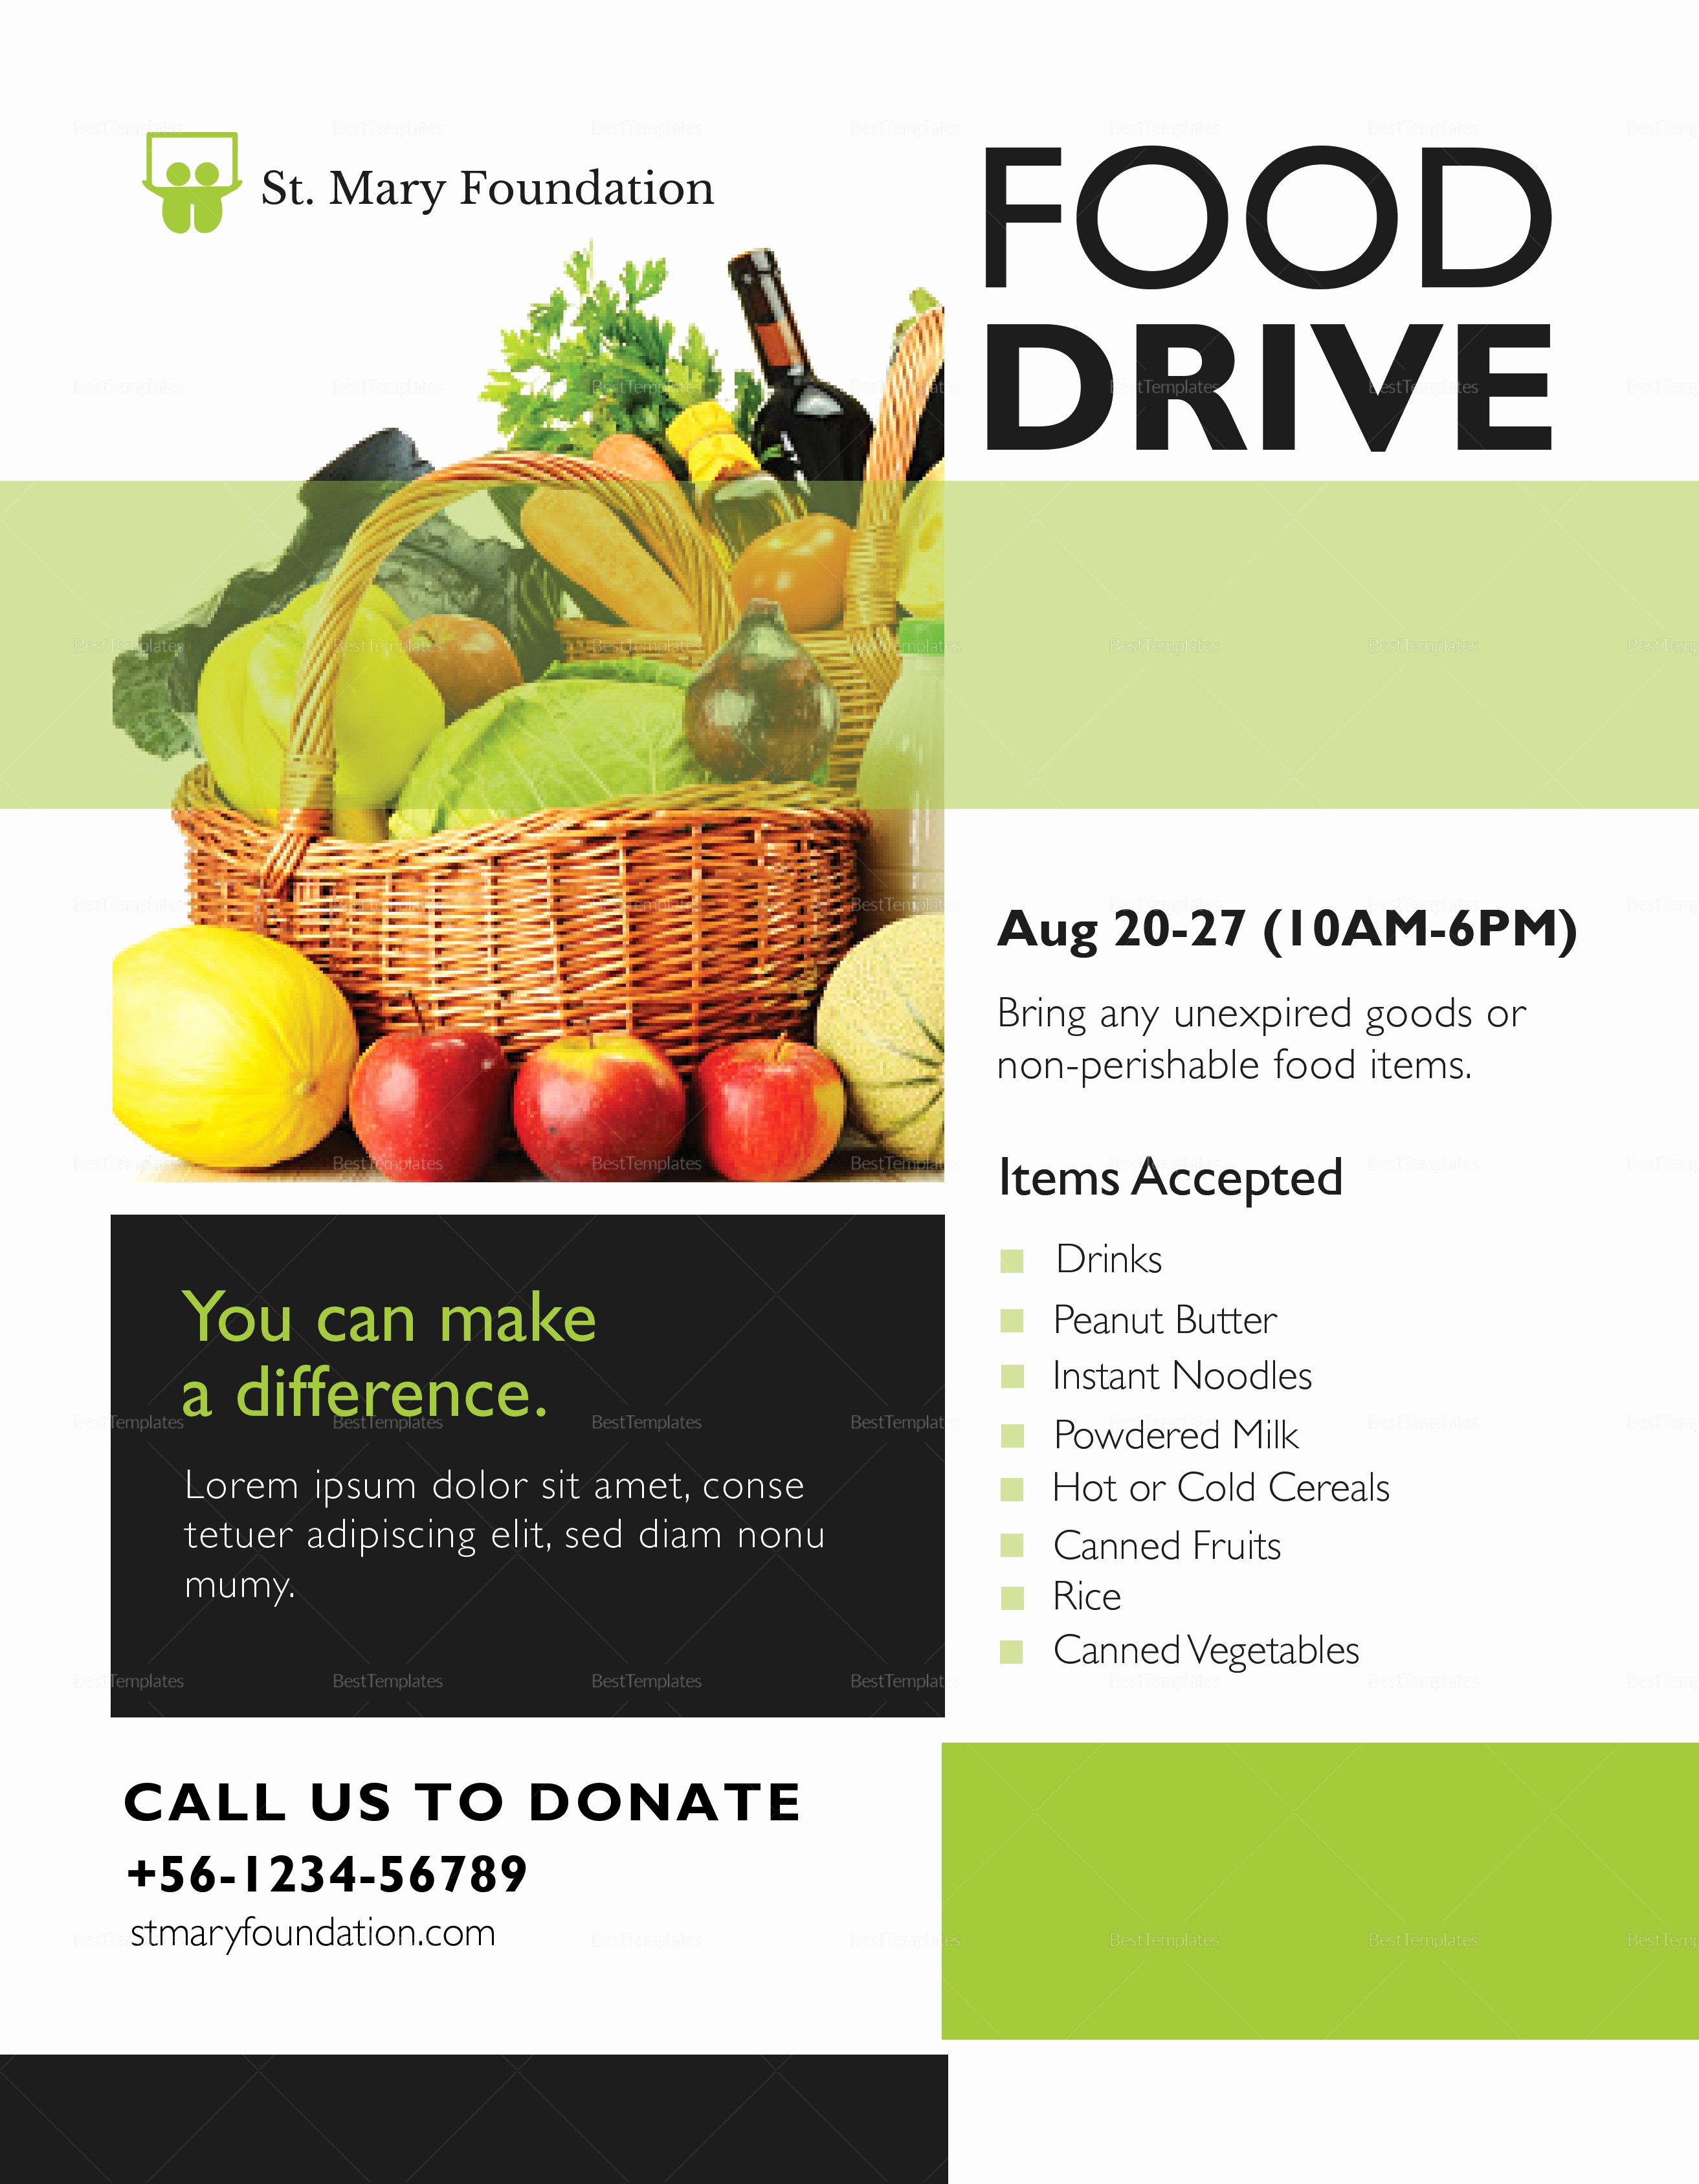 Food Drive Flyer Template Unique Food Drive Flyer Design Template In Psd Word Publisher Illustrator Indesign